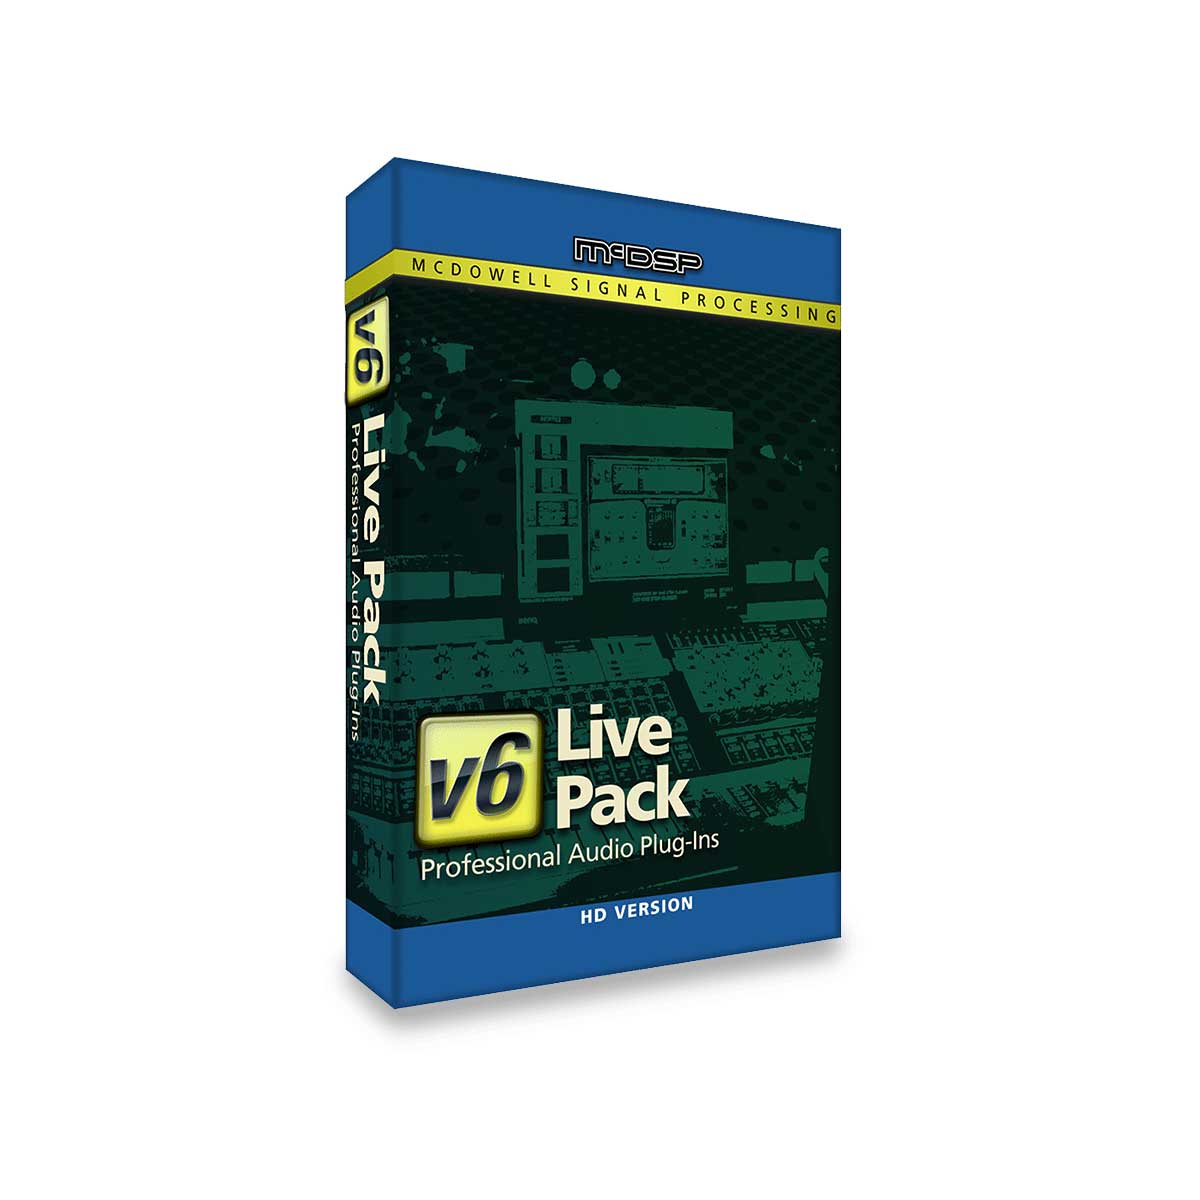 McDSP Live Pack II HD v6 For Avid S6L Systems